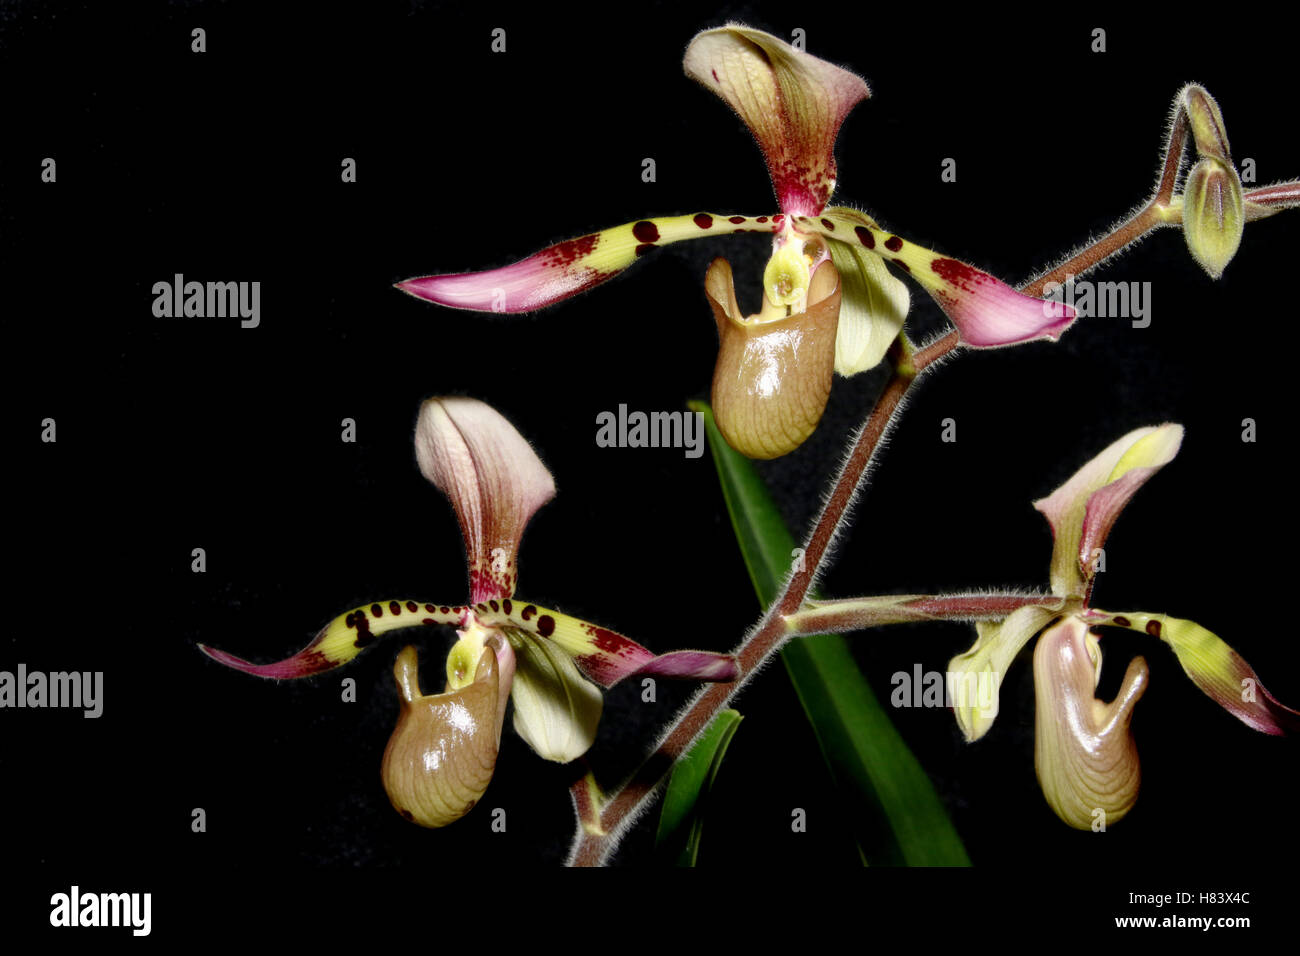 Lady Slipper Orchid. Lady’s Slipper Orchid. Paphiopedilum Toni Semple, lowii x haynaldianum. Orchid flower show. By the Miami Va Stock Photo